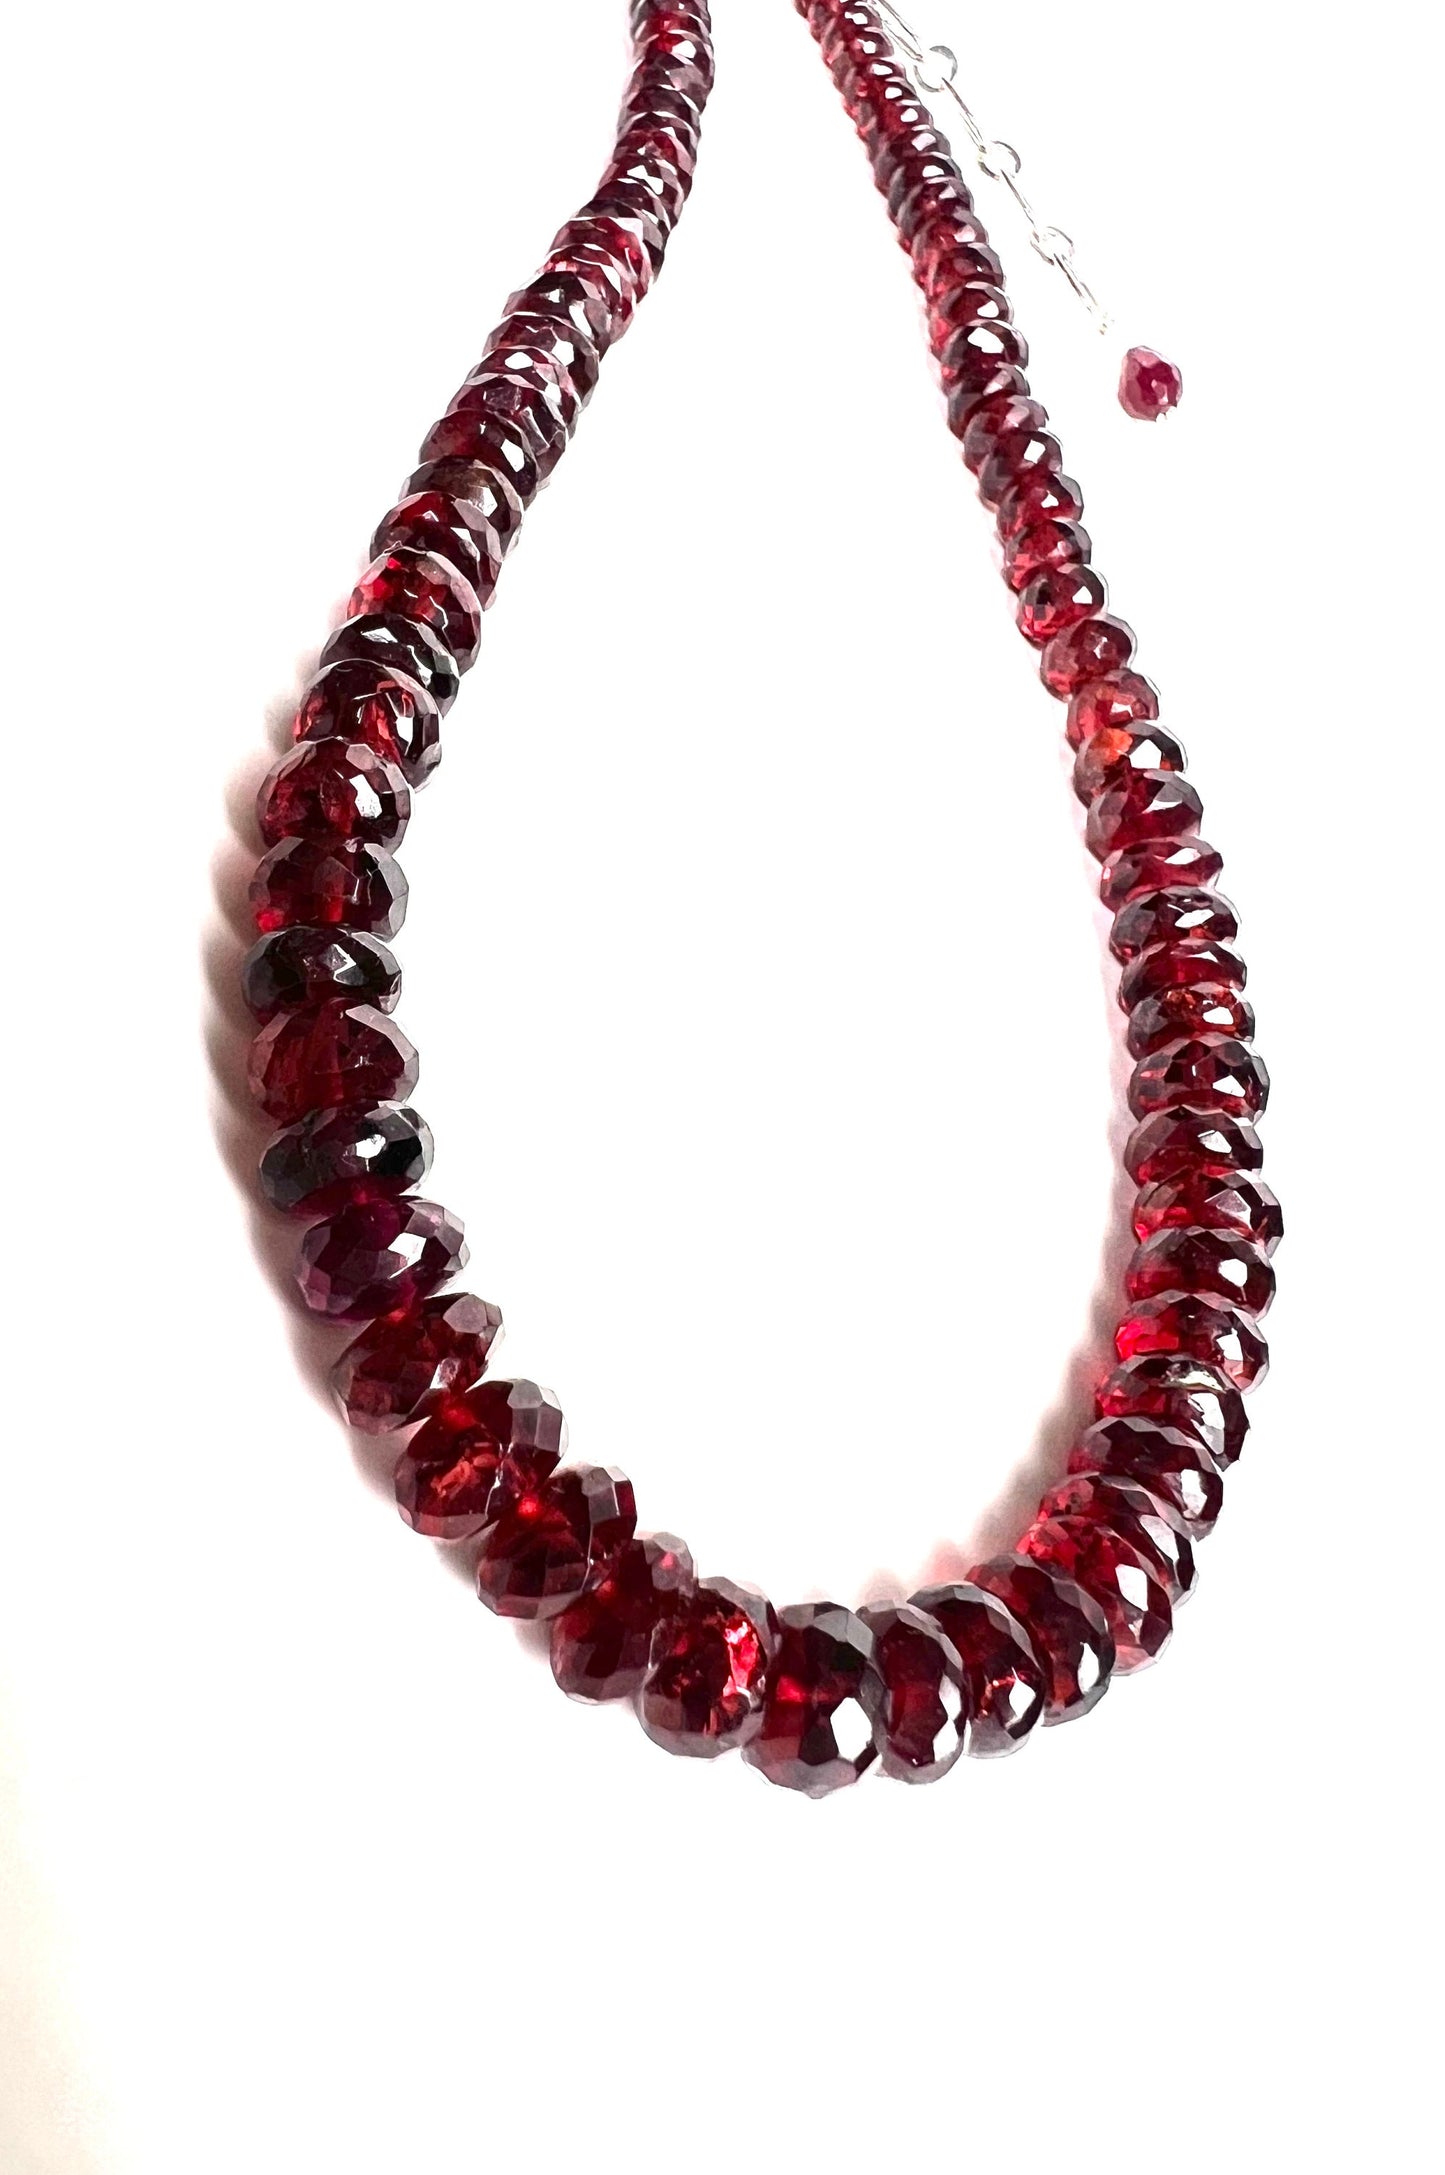 Genuine Garnet large AAA Faceted Rondelle Graduated 5-7mm Necklace with optional 3" Rhodium Extender Chain, January Birthstone